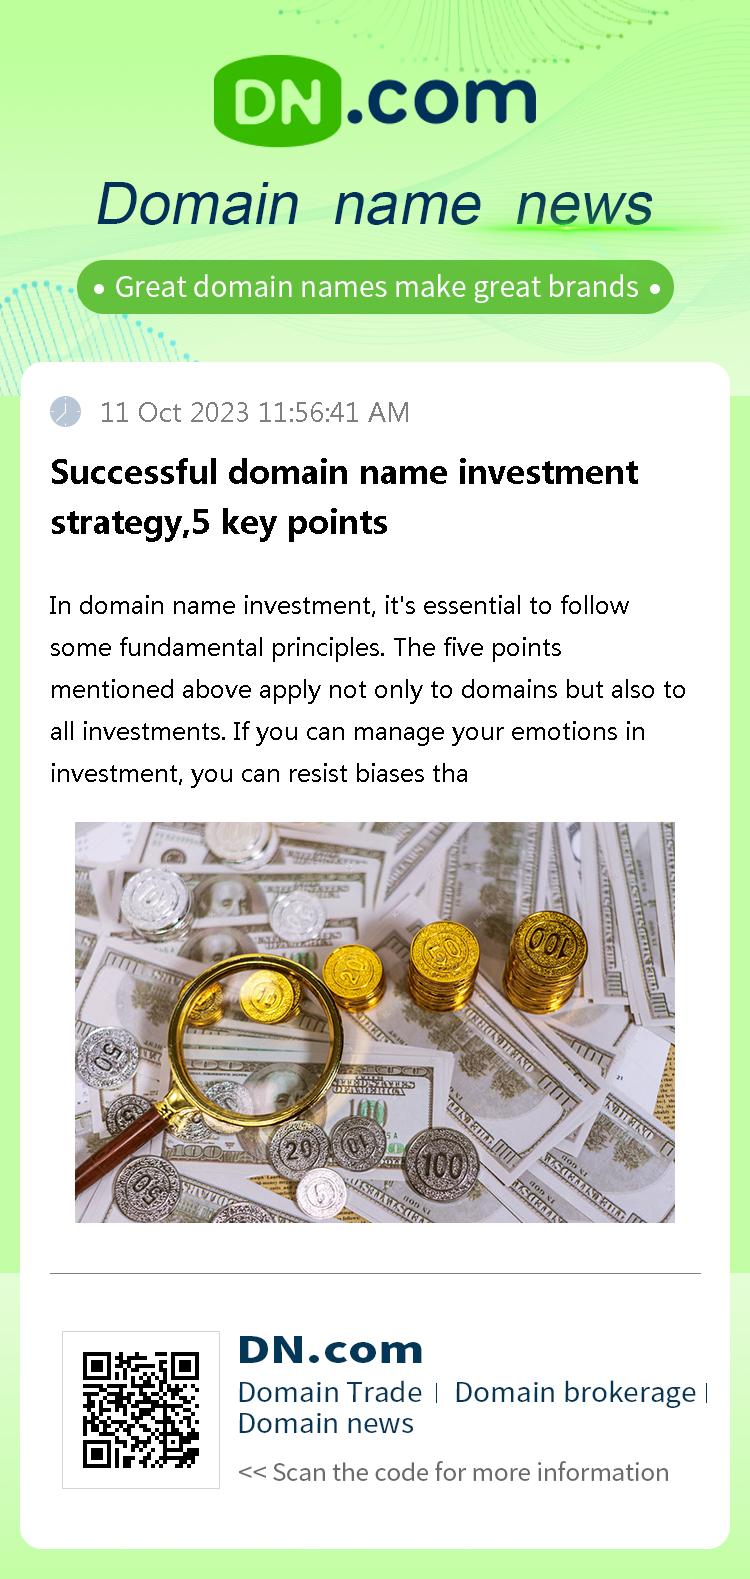 Successful domain name investment strategy,5 key points